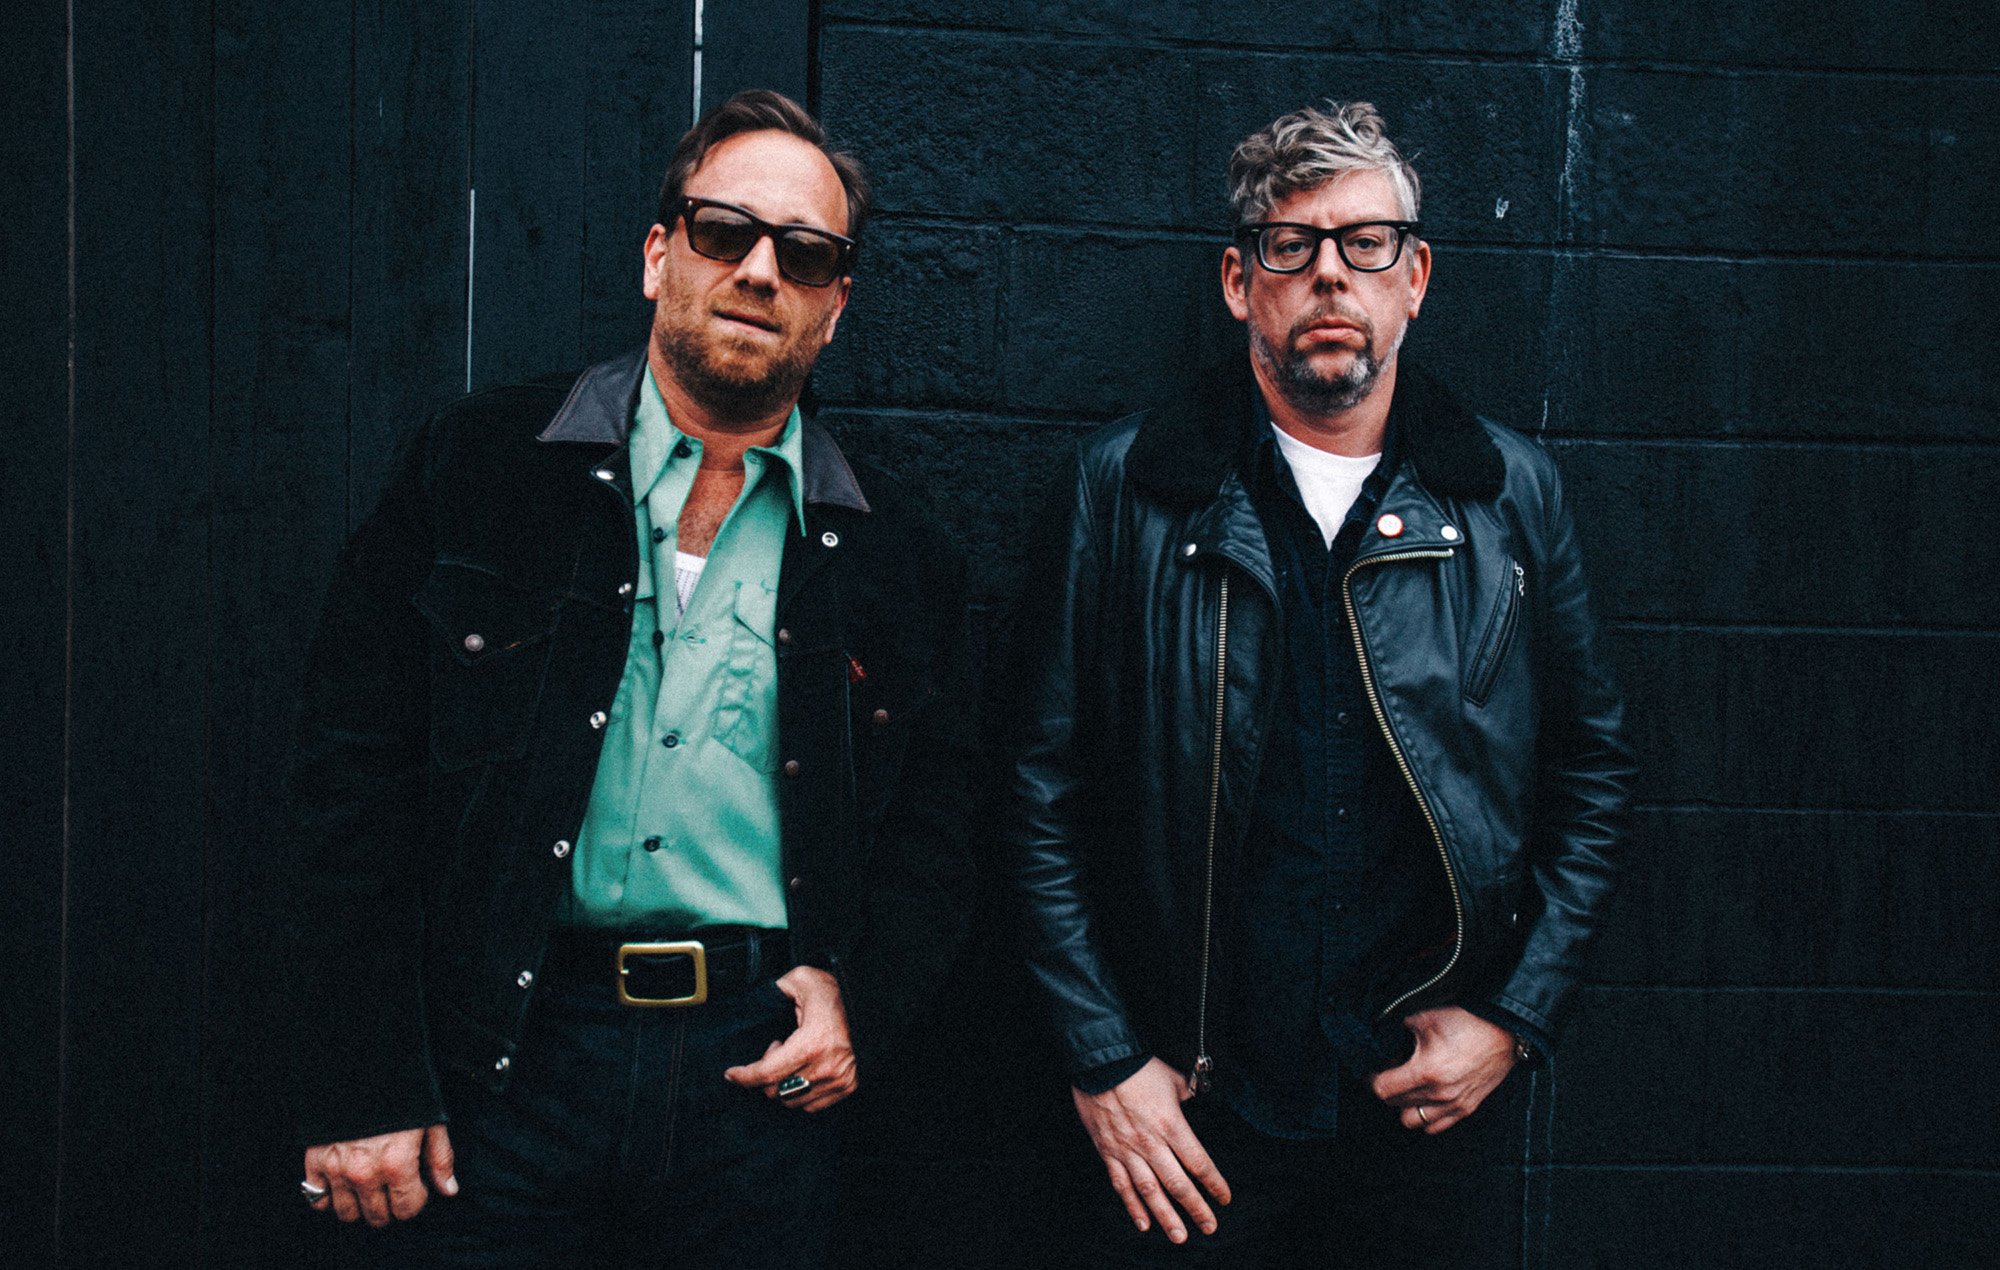 The Black Keys – ‘Ohio Players’ review: familiar rock bangers with help from Noel Gallagher and Beck